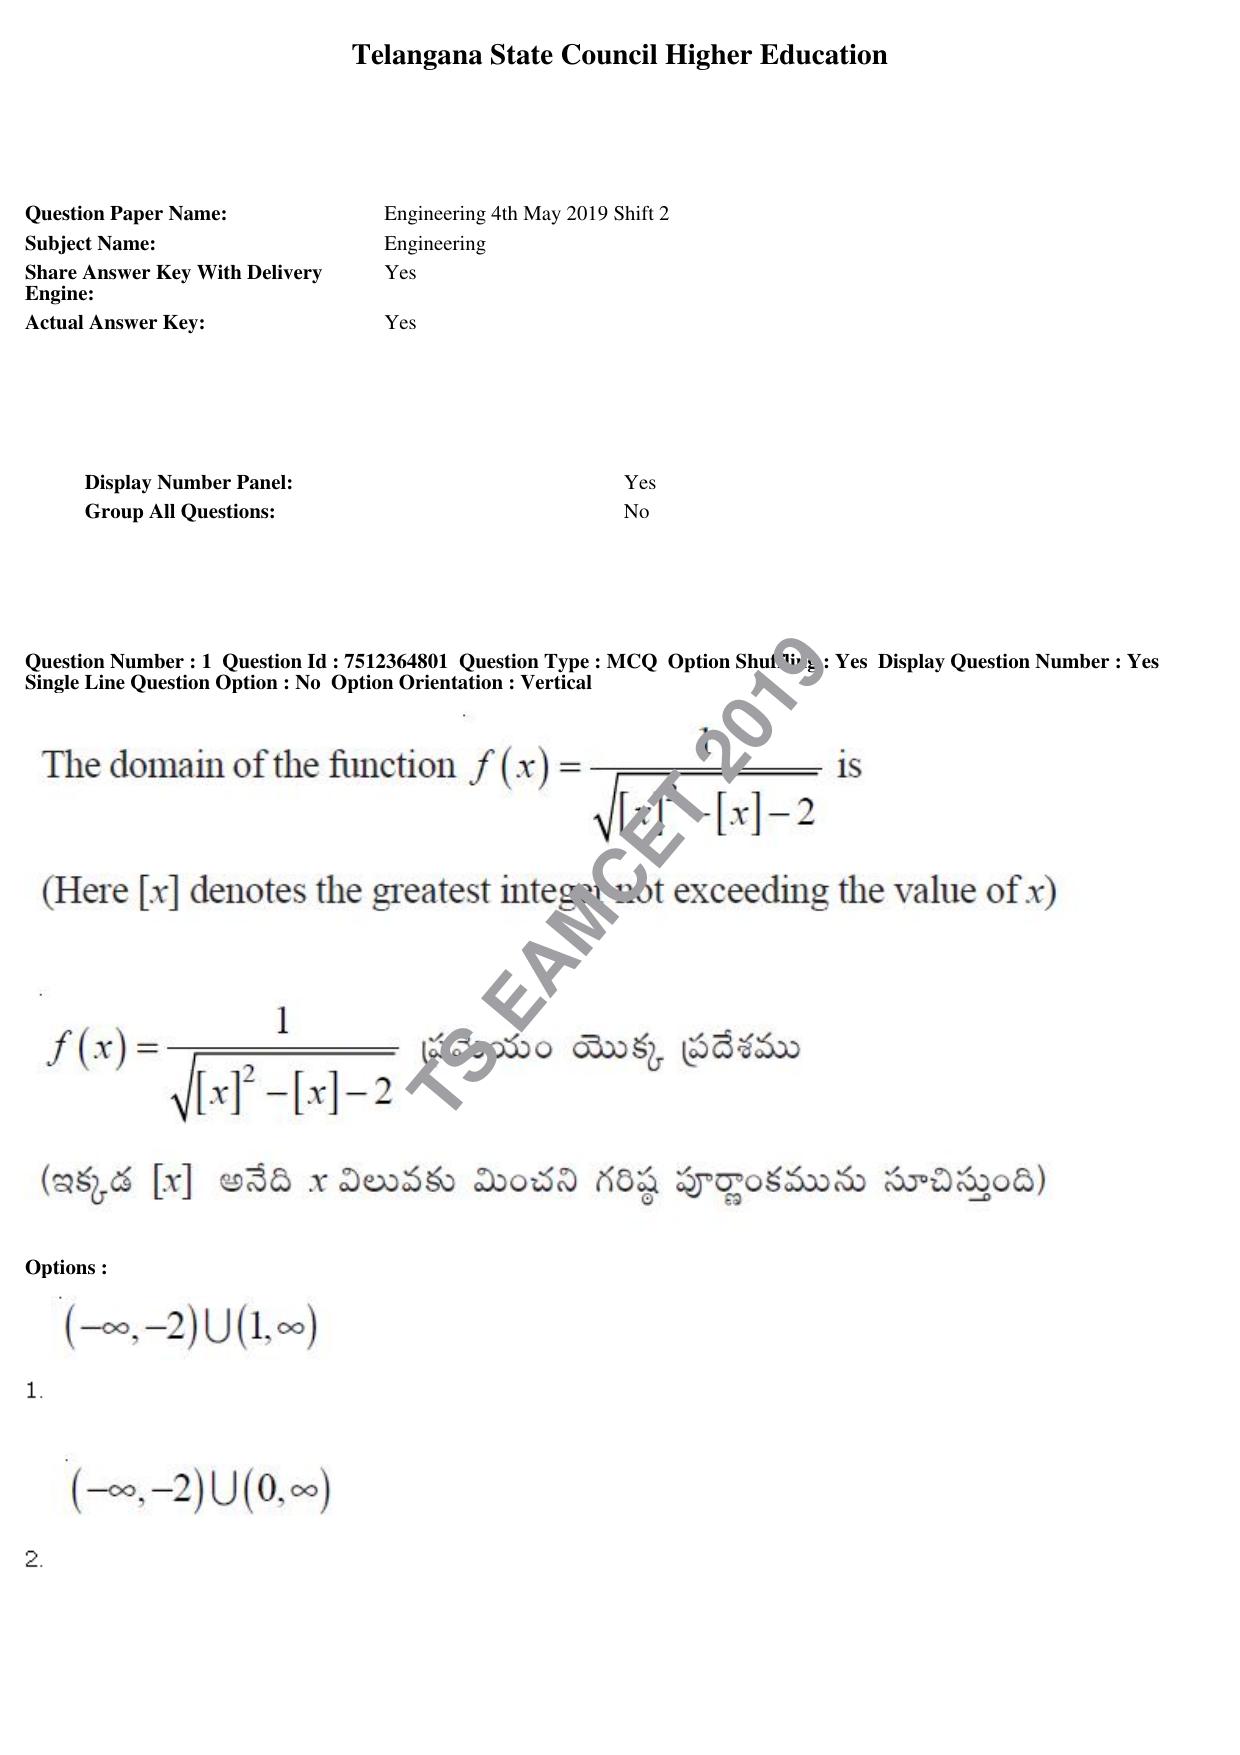 TS EAMCET 2019 Engineering Question Paper with Key (4 May 2019 Afternoon) - Page 1